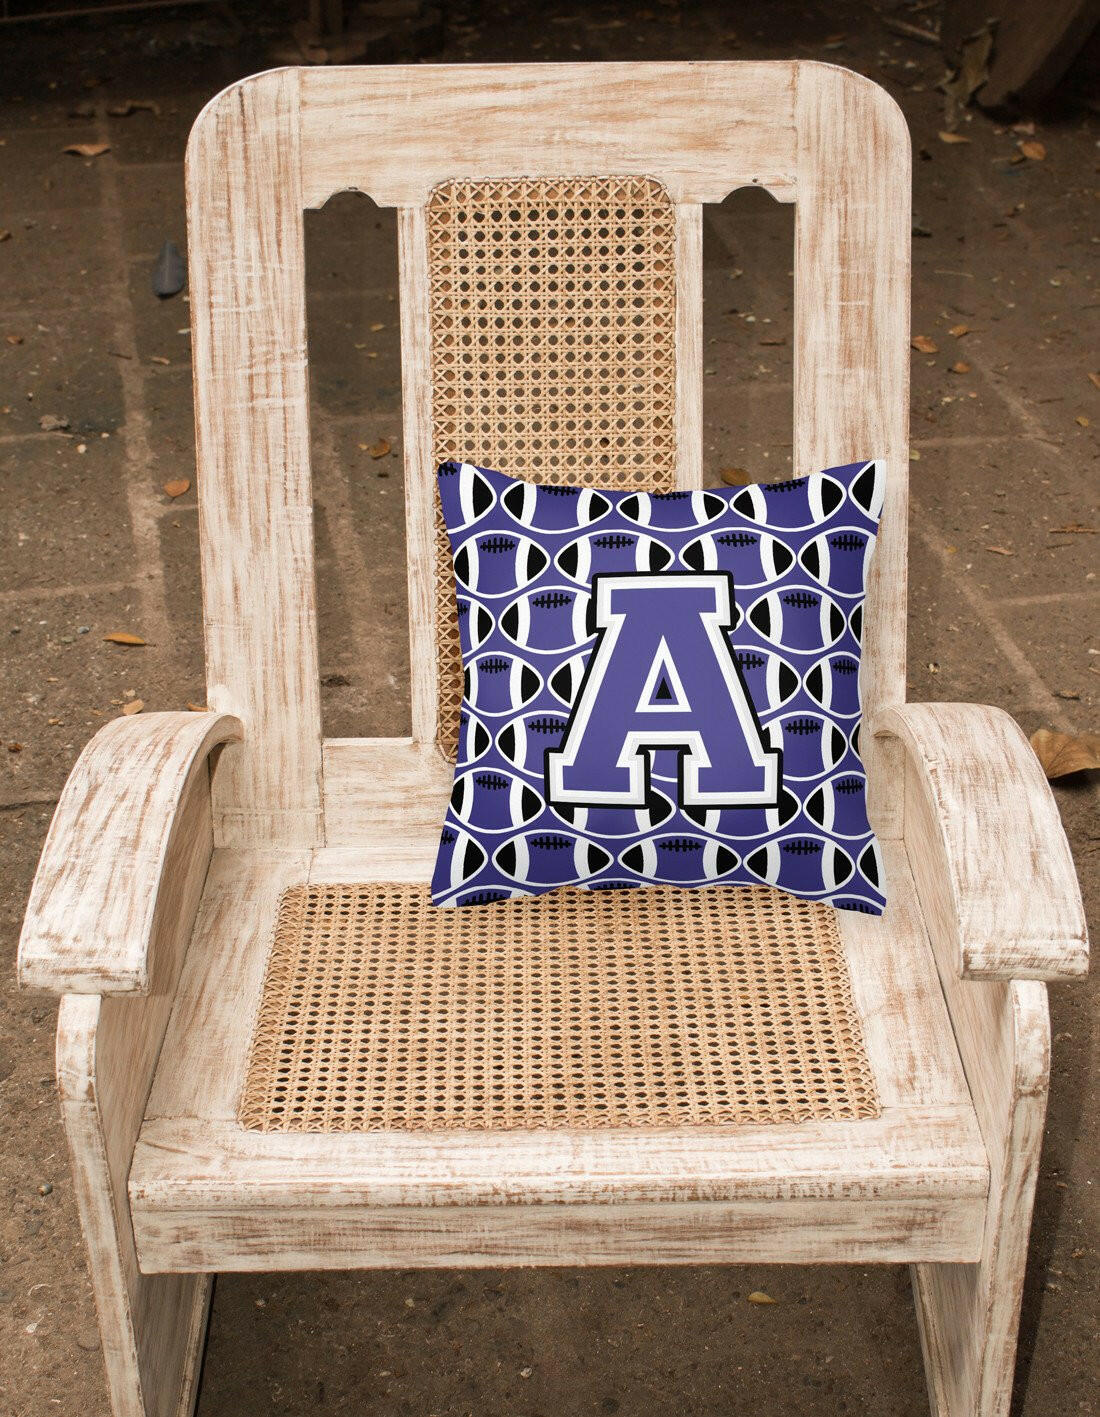 Letter A Football Purple and White Fabric Decorative Pillow CJ1068-APW1414 by Caroline's Treasures